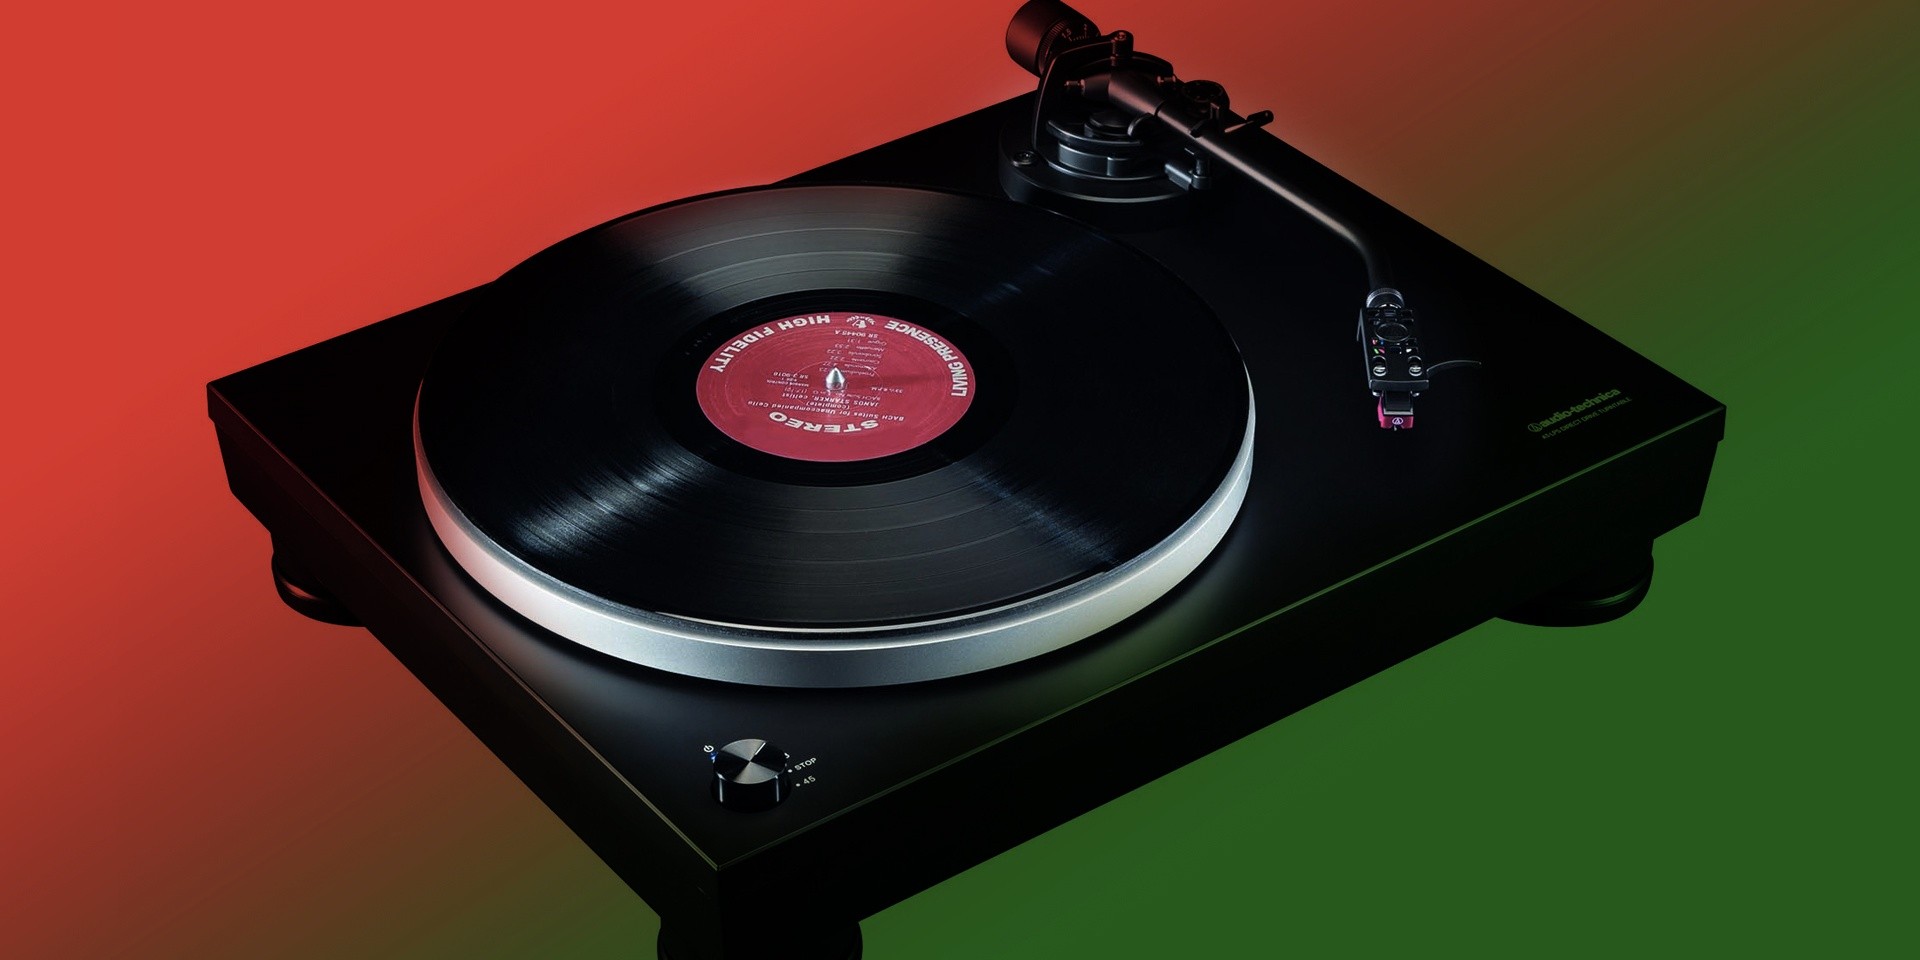 Christmas guide: vinyl records, gear and accessories worth getting